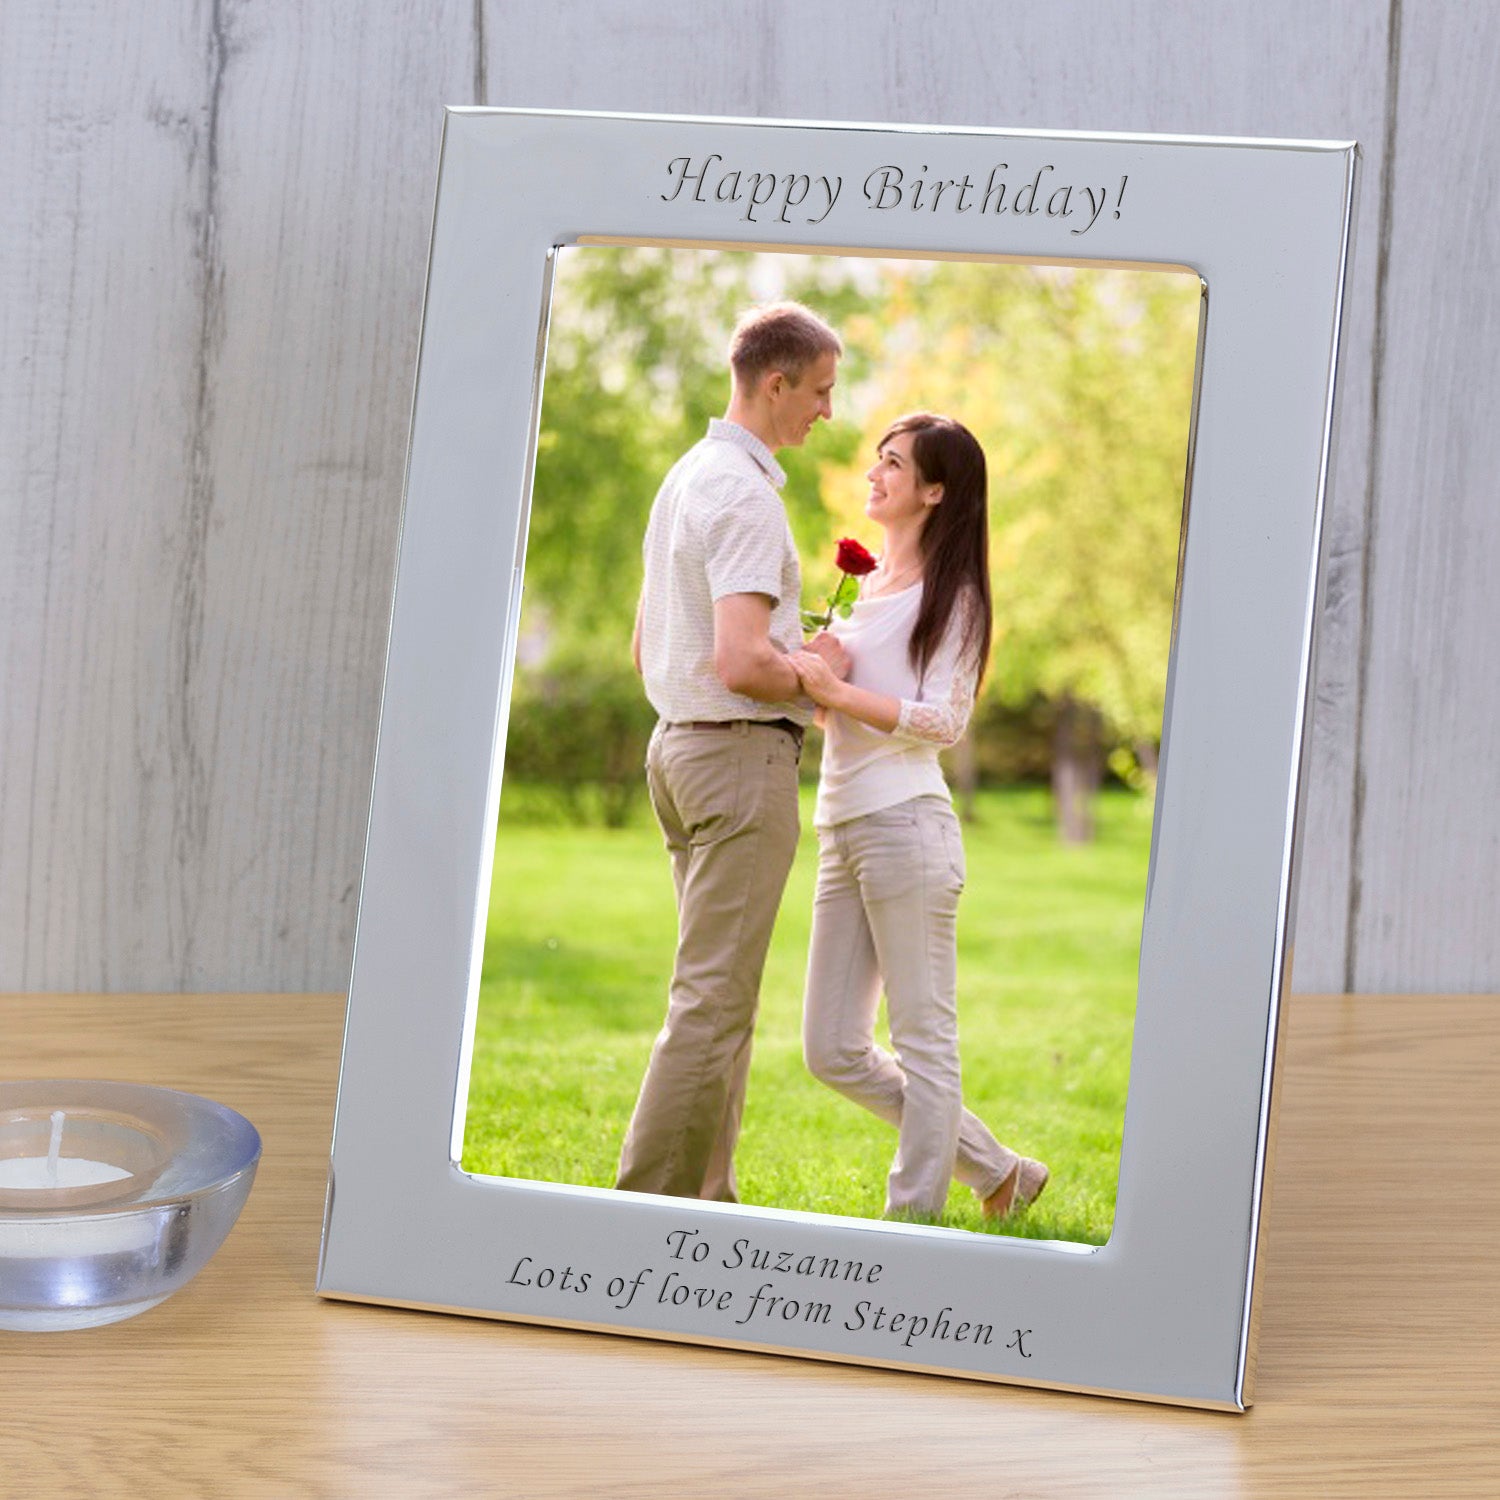 Engraved Personalised Silver Plated Photo Frame - Any Message 6x4